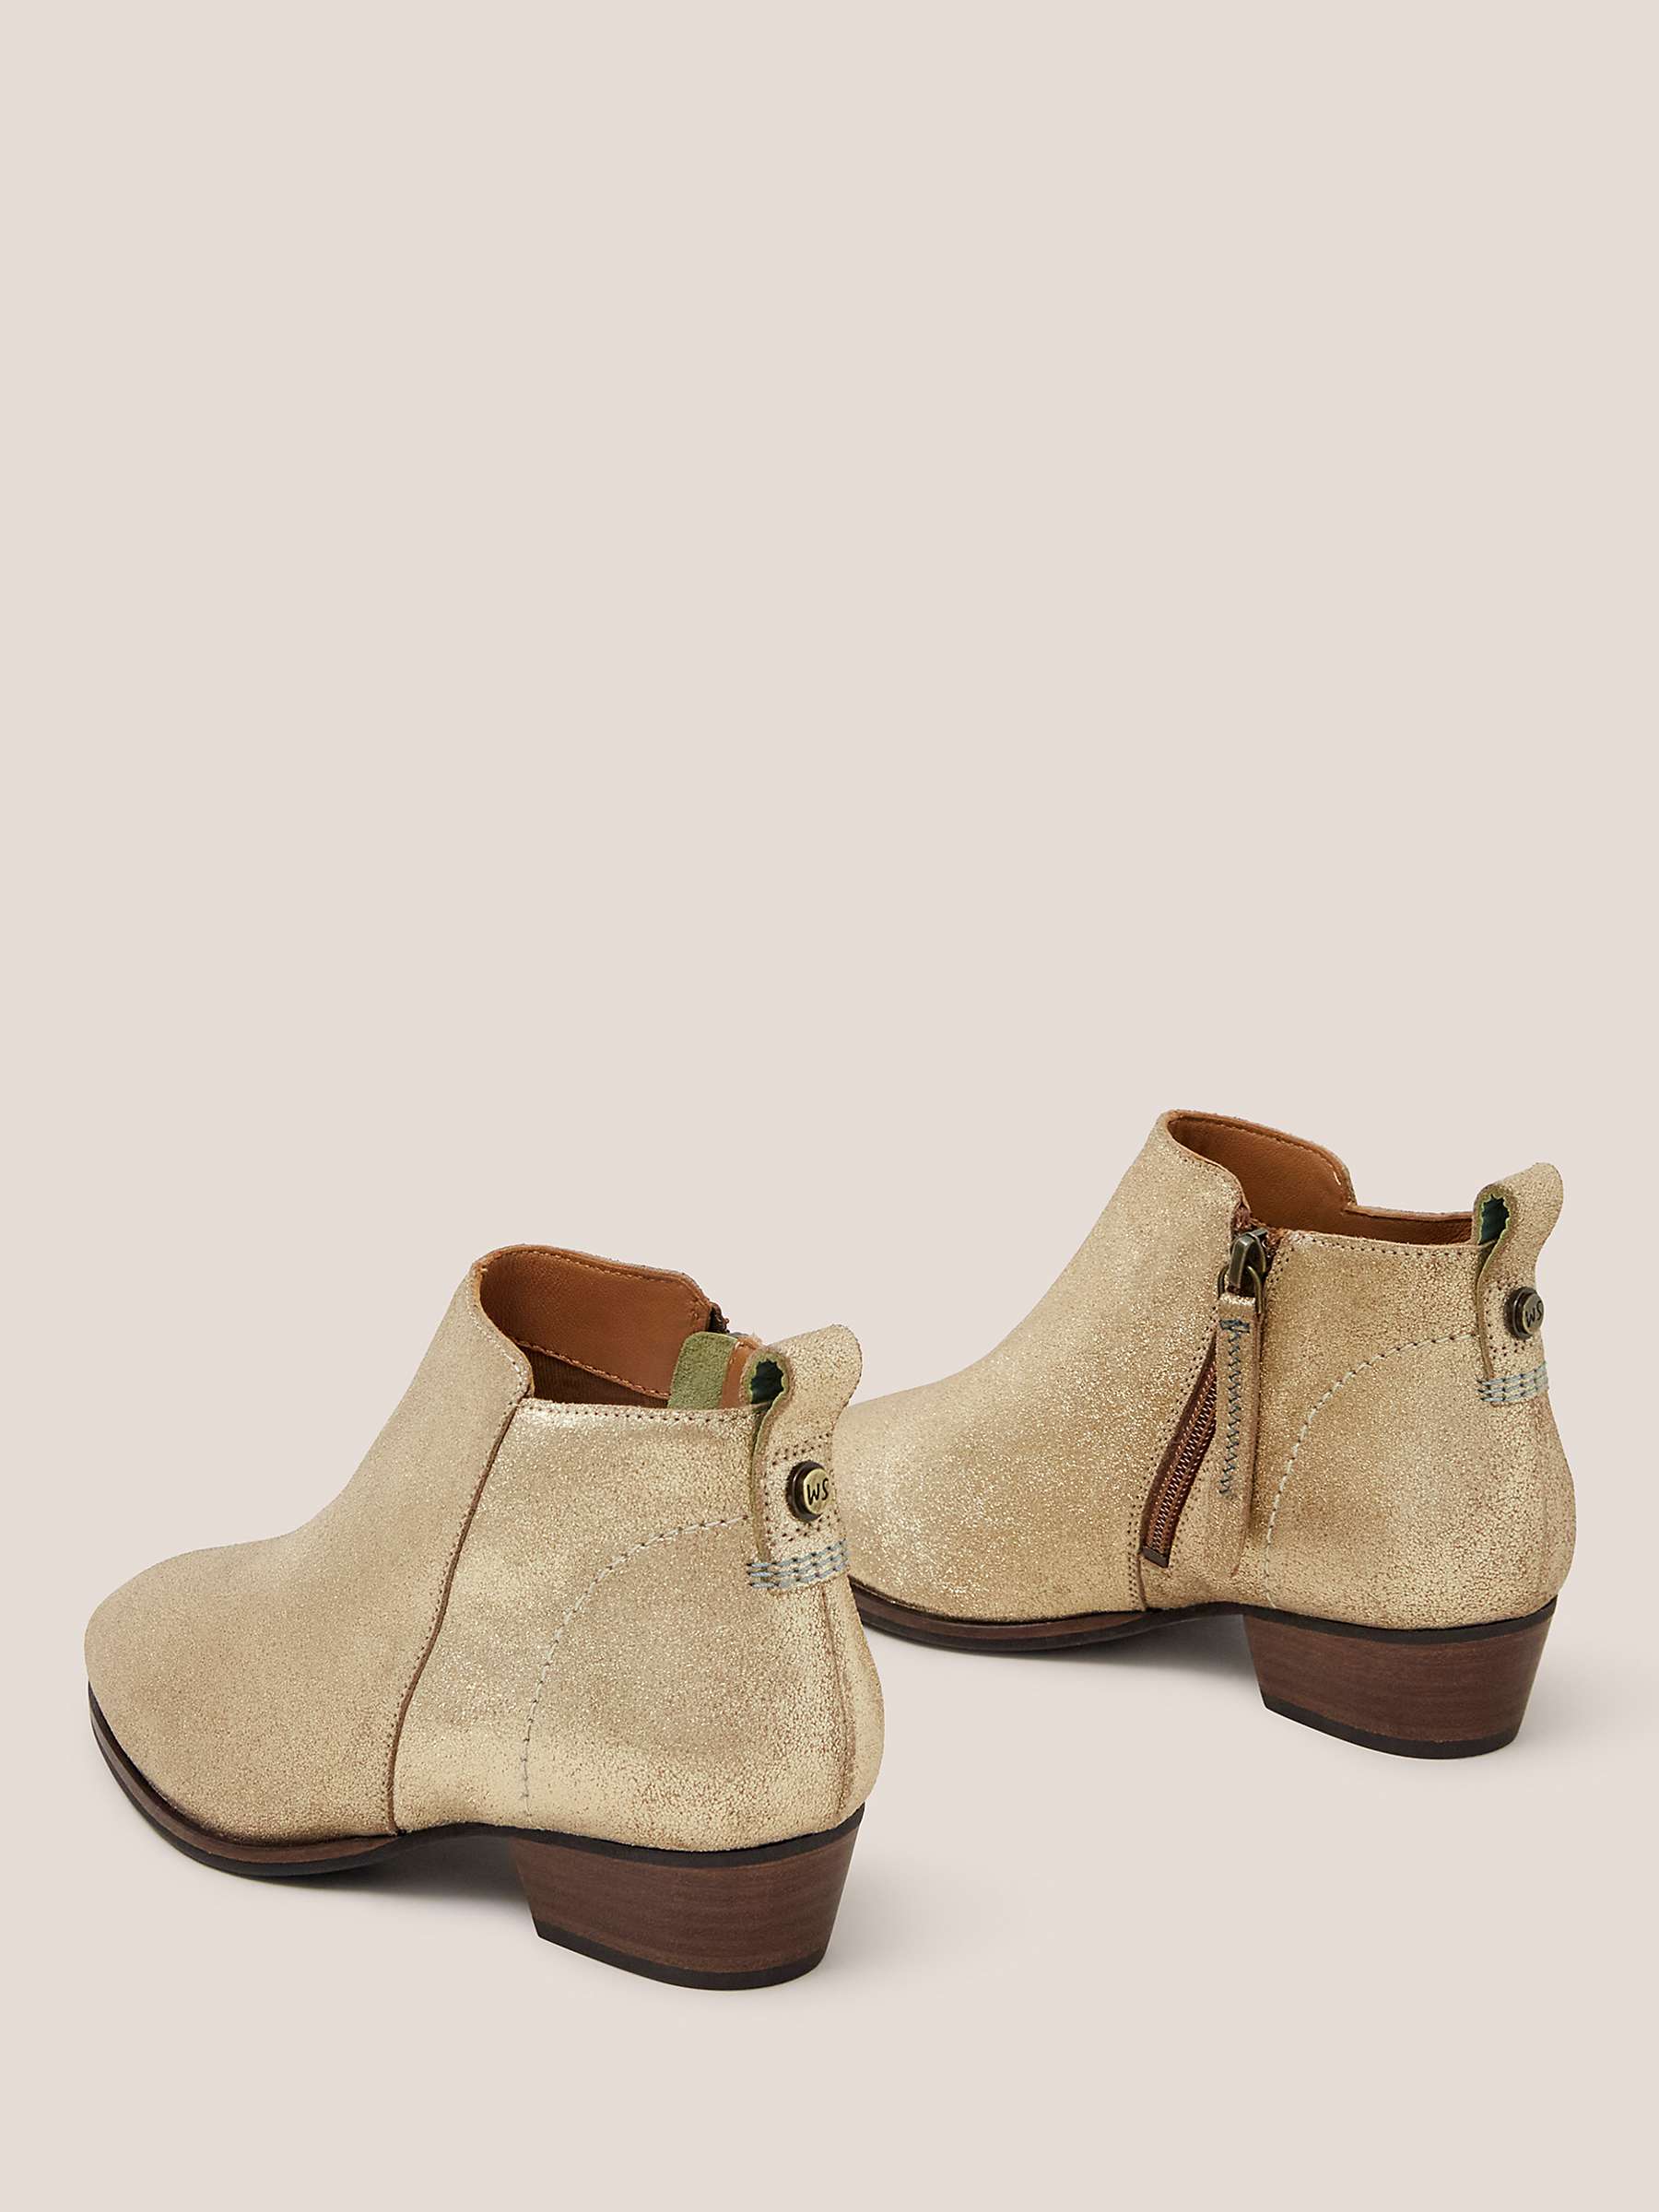 Buy White Stuff Willow Leather Ankle Boots Online at johnlewis.com